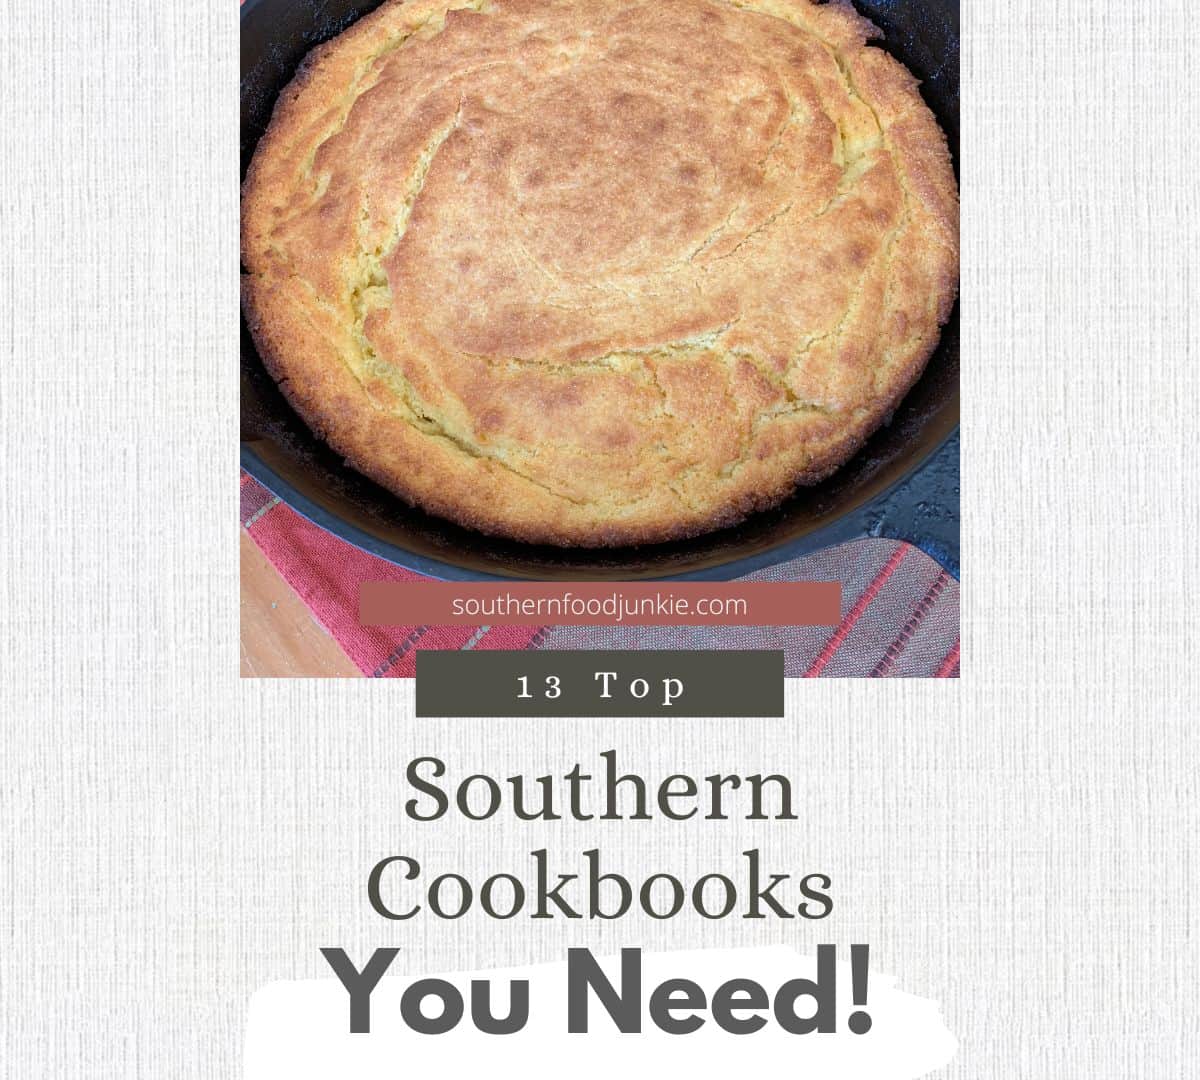 13 Top Southern Cookbooks You Need!